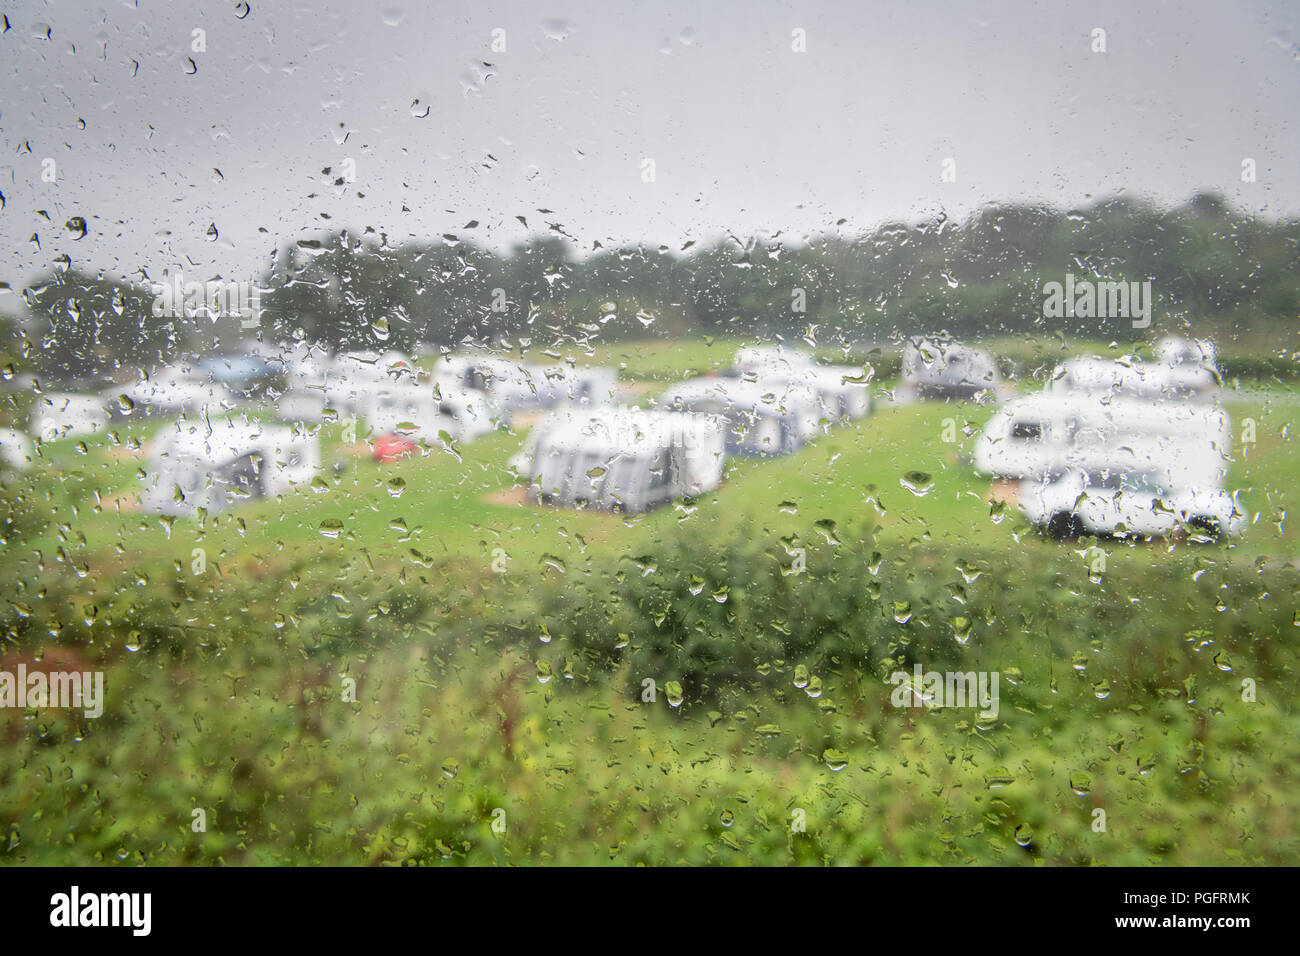 Dorset, UK.  26th August 2018. The Bank Holiday weekend turns soggy for holiday makers in their caravans at Wood Farm Camping and caravanning site as persistent rain and gusty winds replace the previous sunny weather. The rain is forecast to continue all day, clearing overnight. Credit: Julian Eales/Alamy Live News Stock Photo